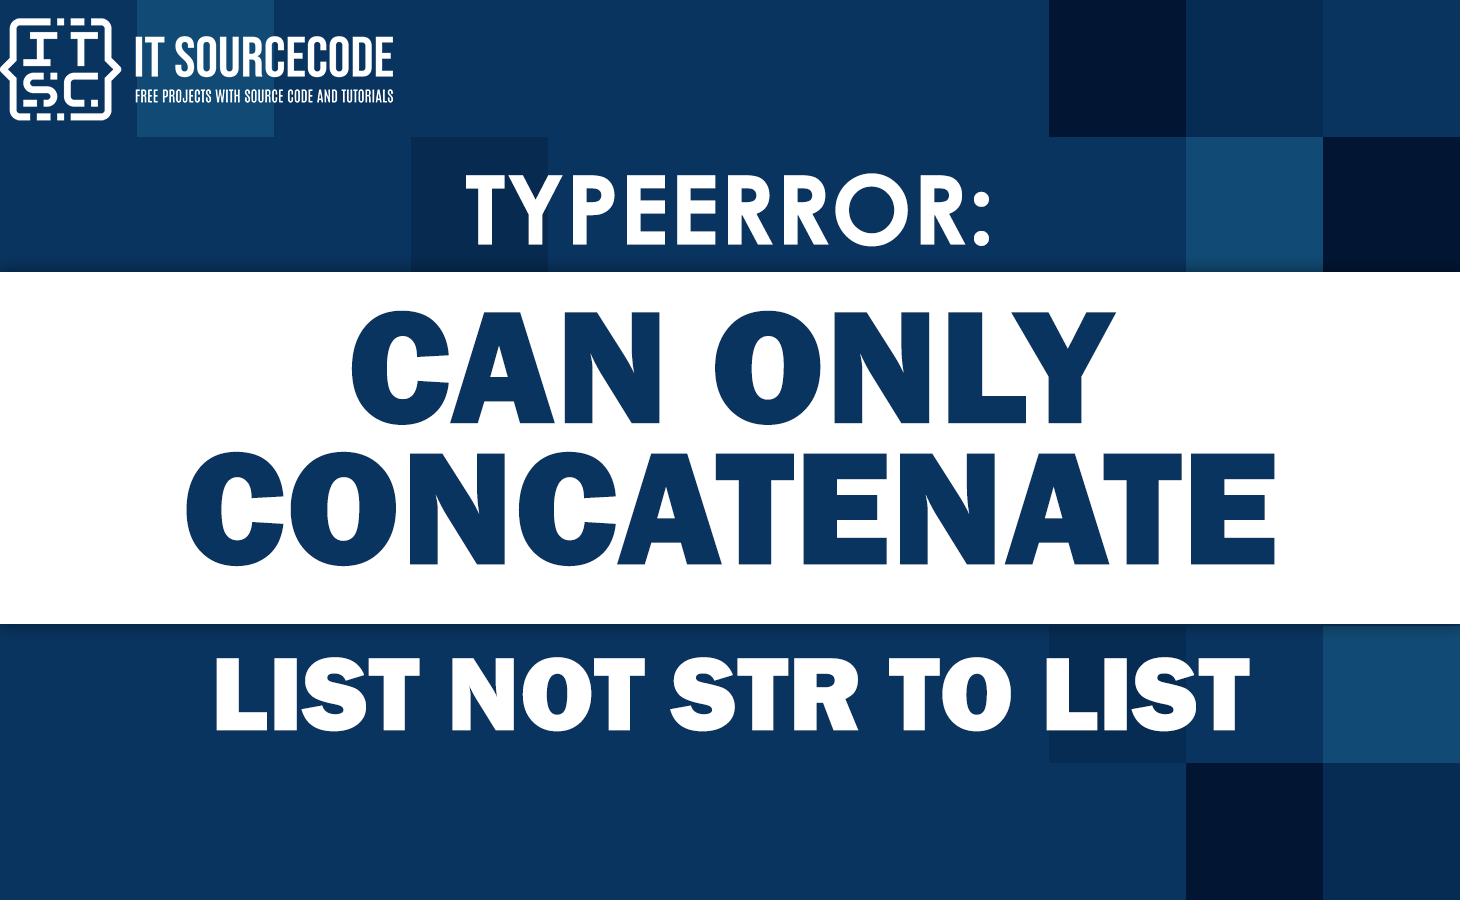 Typeerror can only concatenate list not str to list